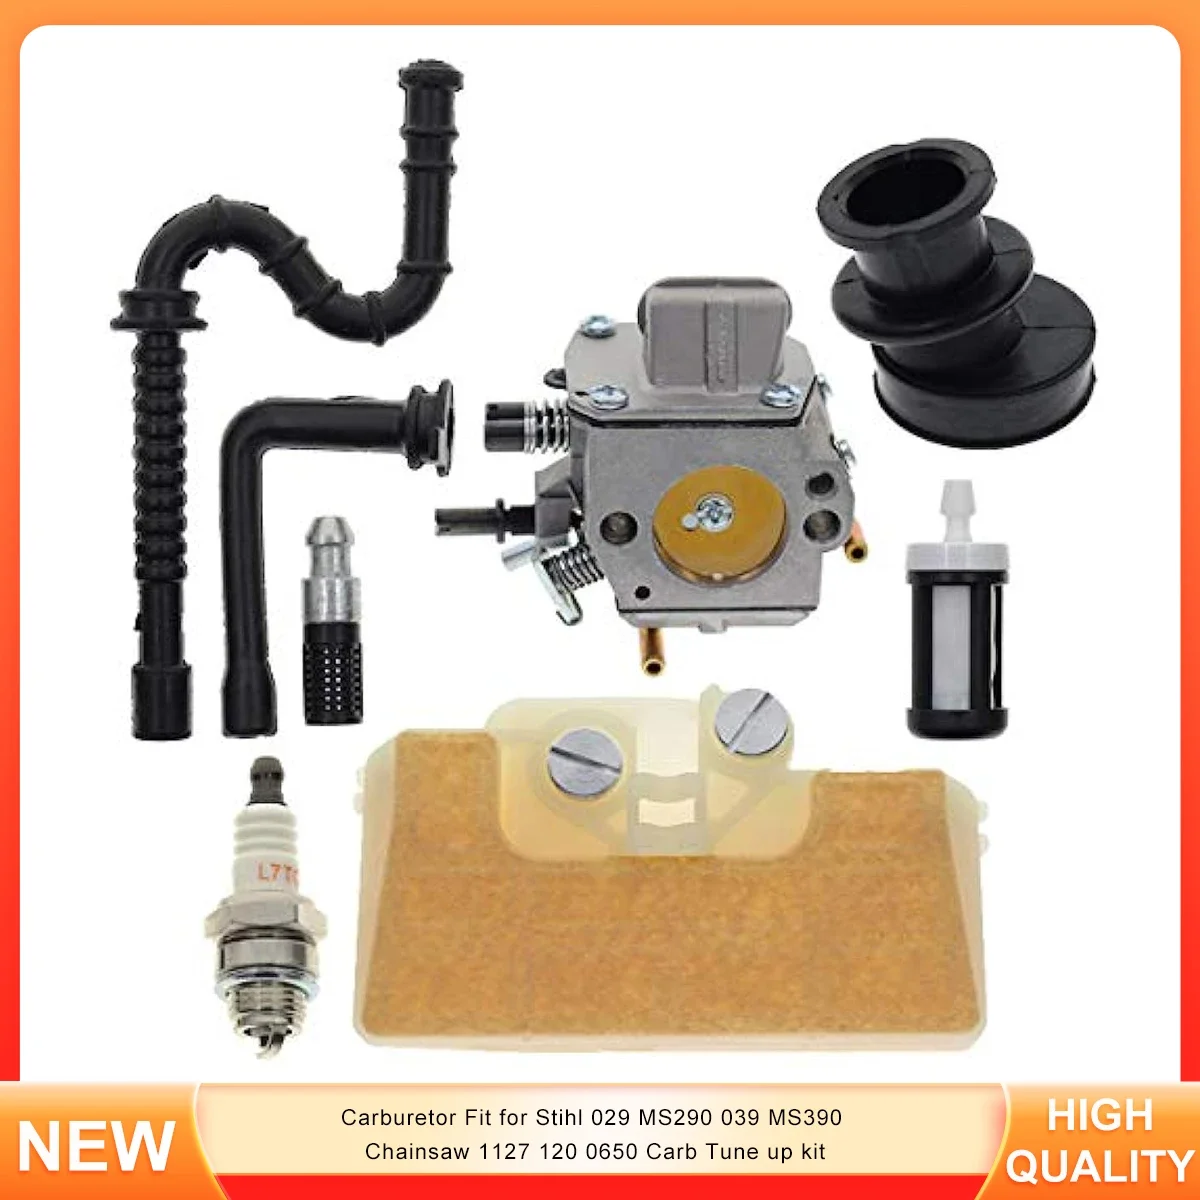 

Carburetor Fit for Stihl 029 MS290 039 MS390 Chainsaw 1127 120 0650 Carb Tune up kit